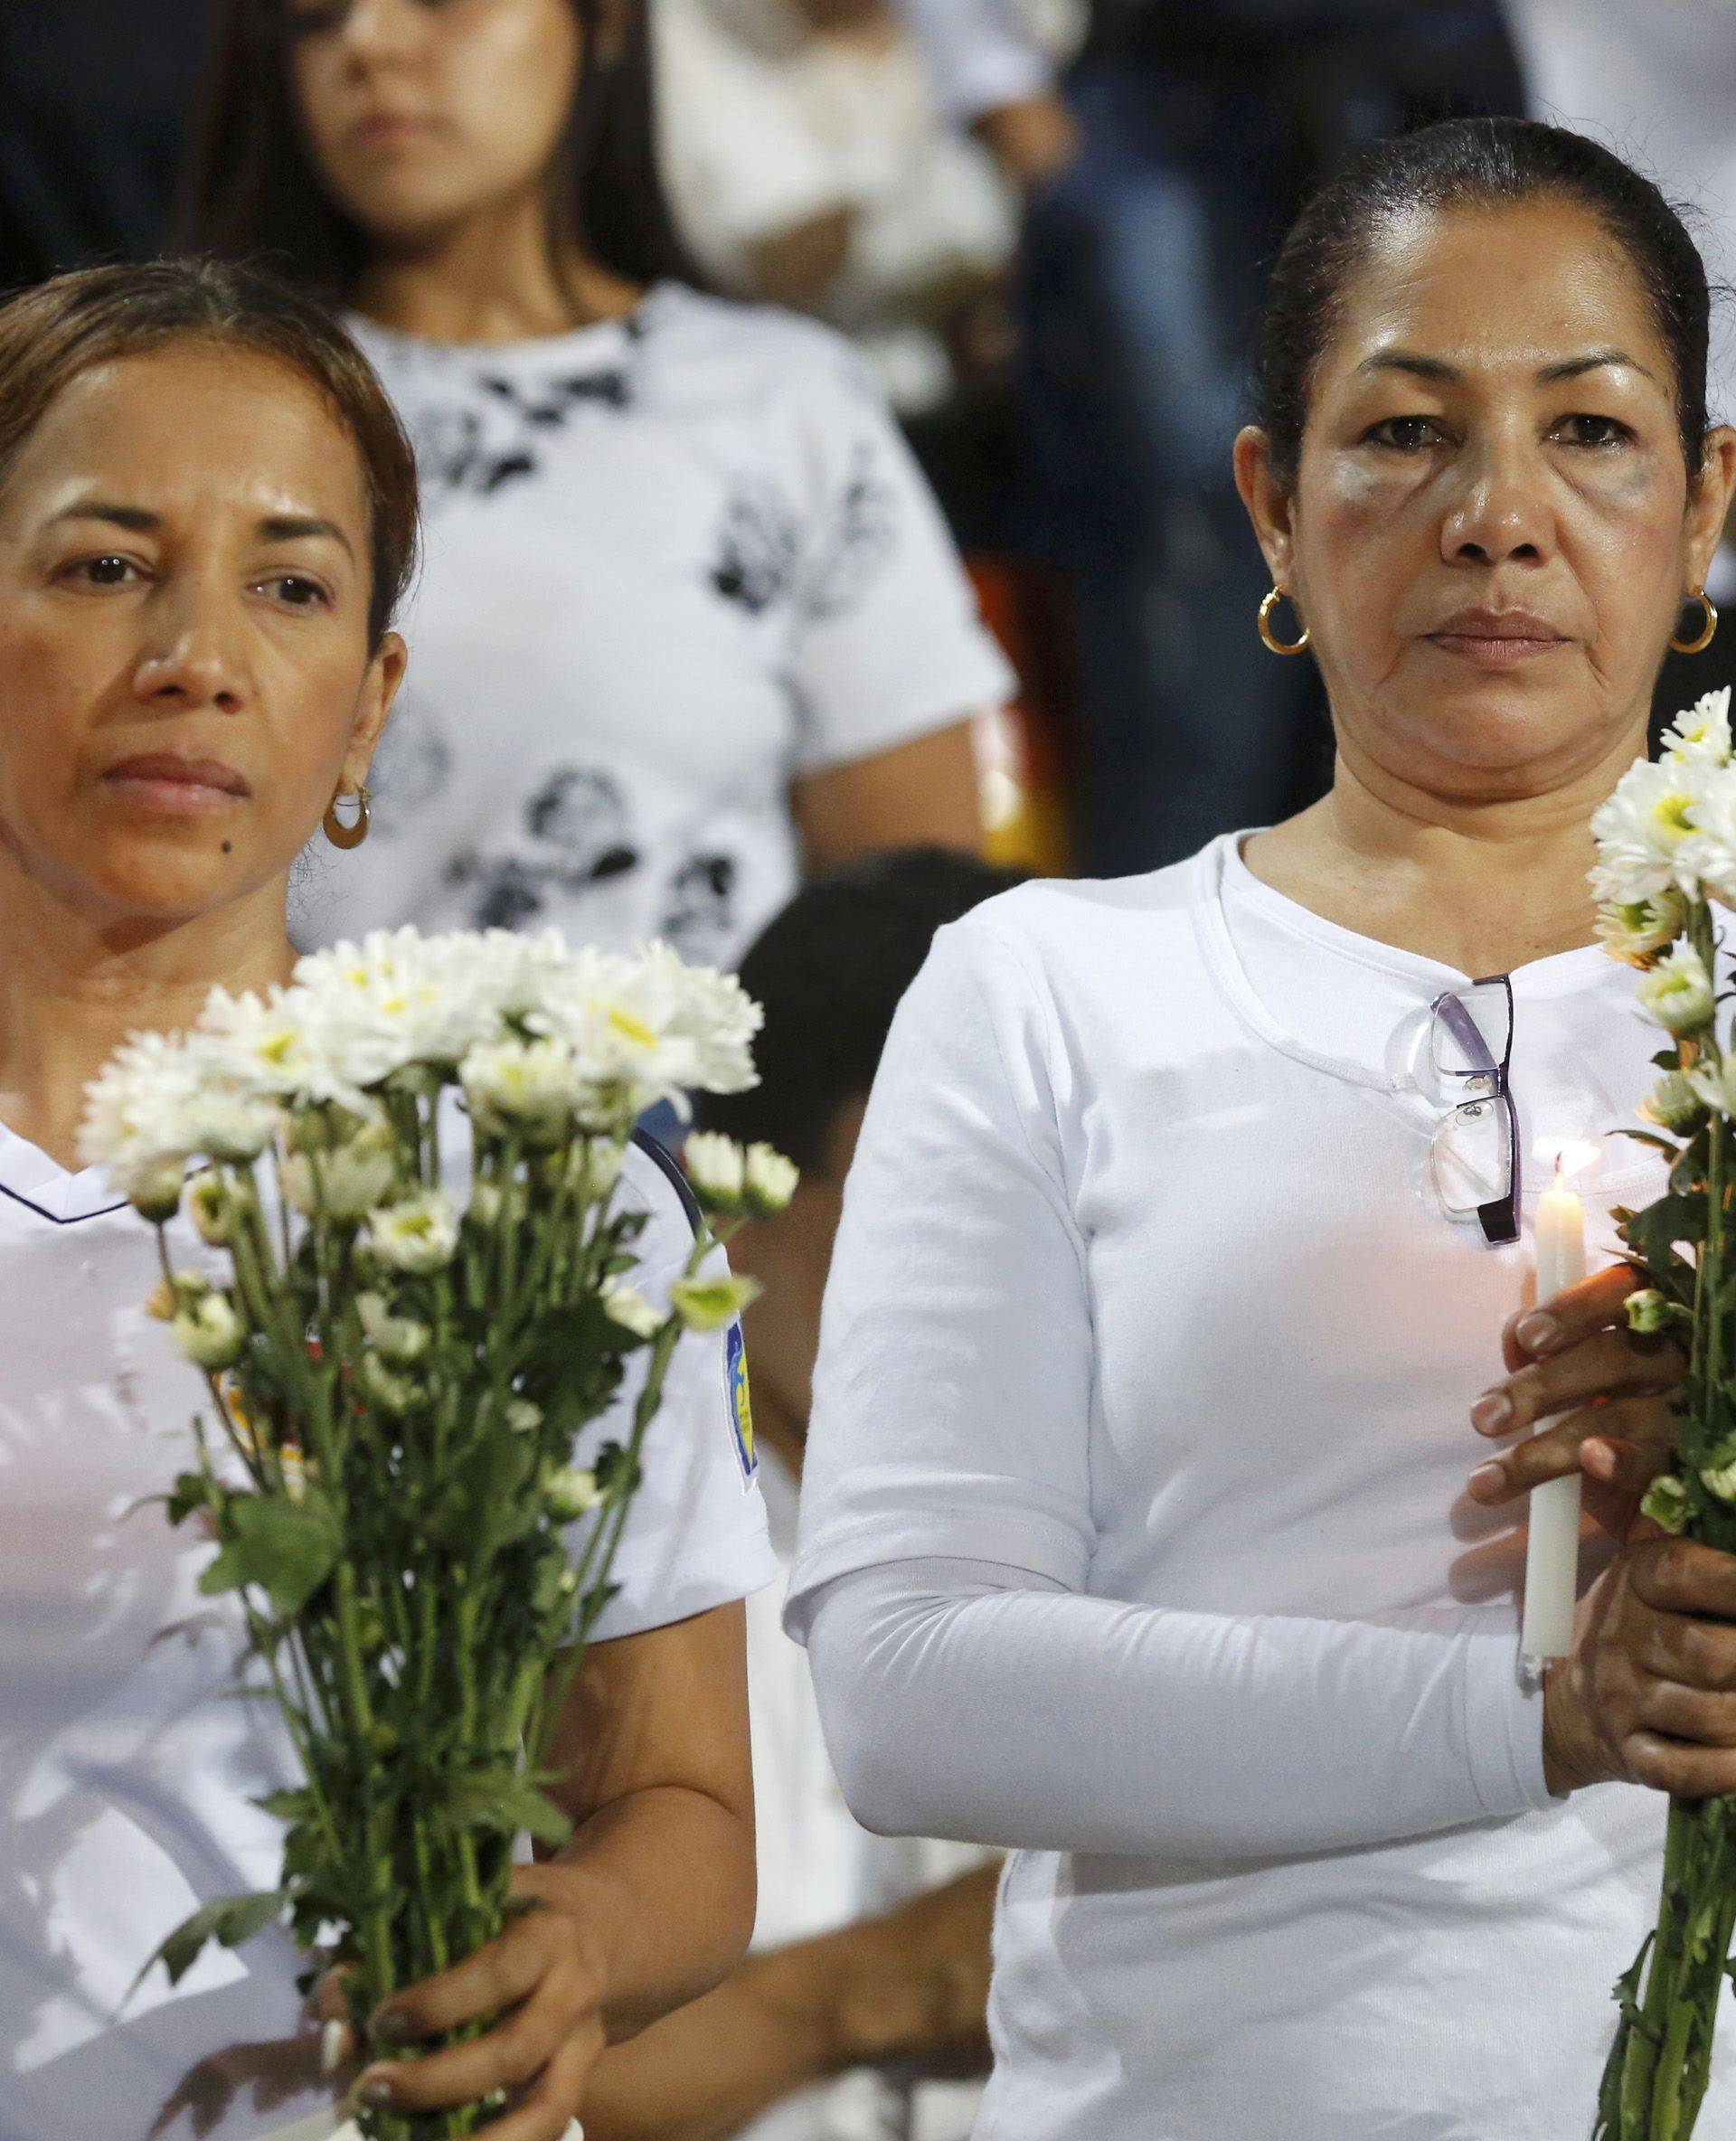 Fans of Atletico Nacional soccer club pay tribute to the players of Brazilian club Chapecoense killed in the recent airplane crash in Medellin